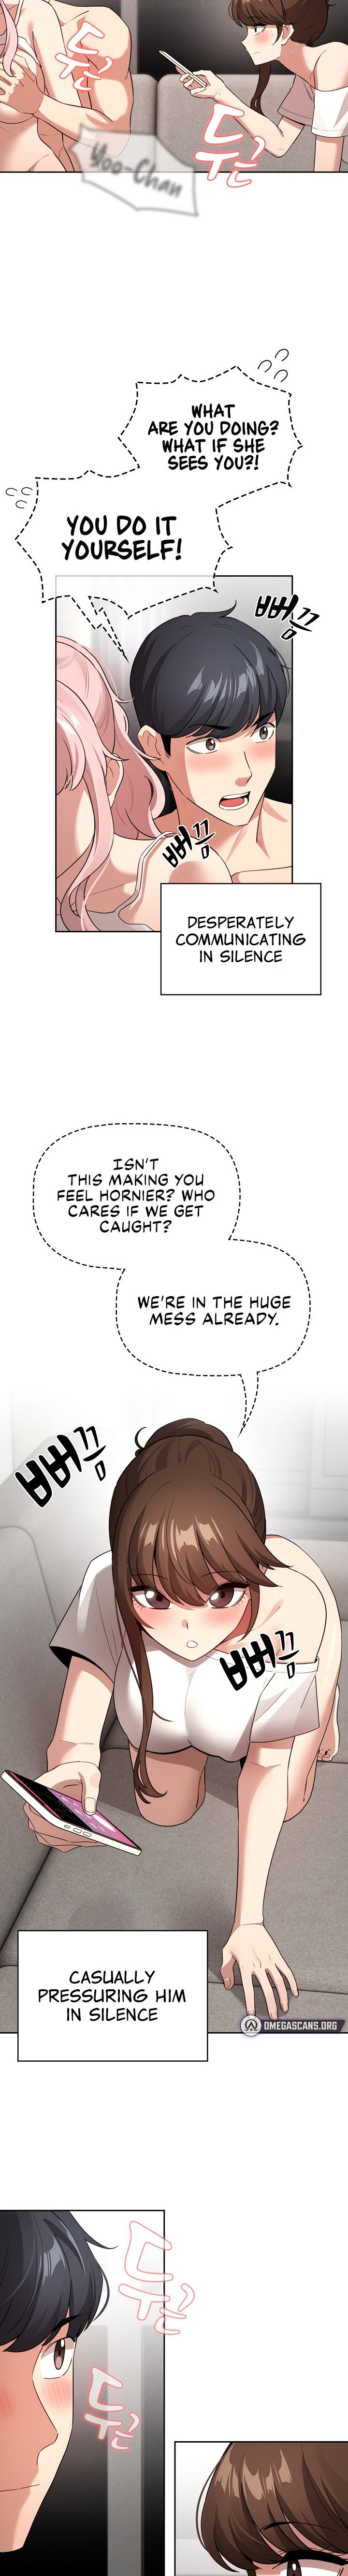 Private Tutoring in These Trying Times - Chapter 114 Page 2